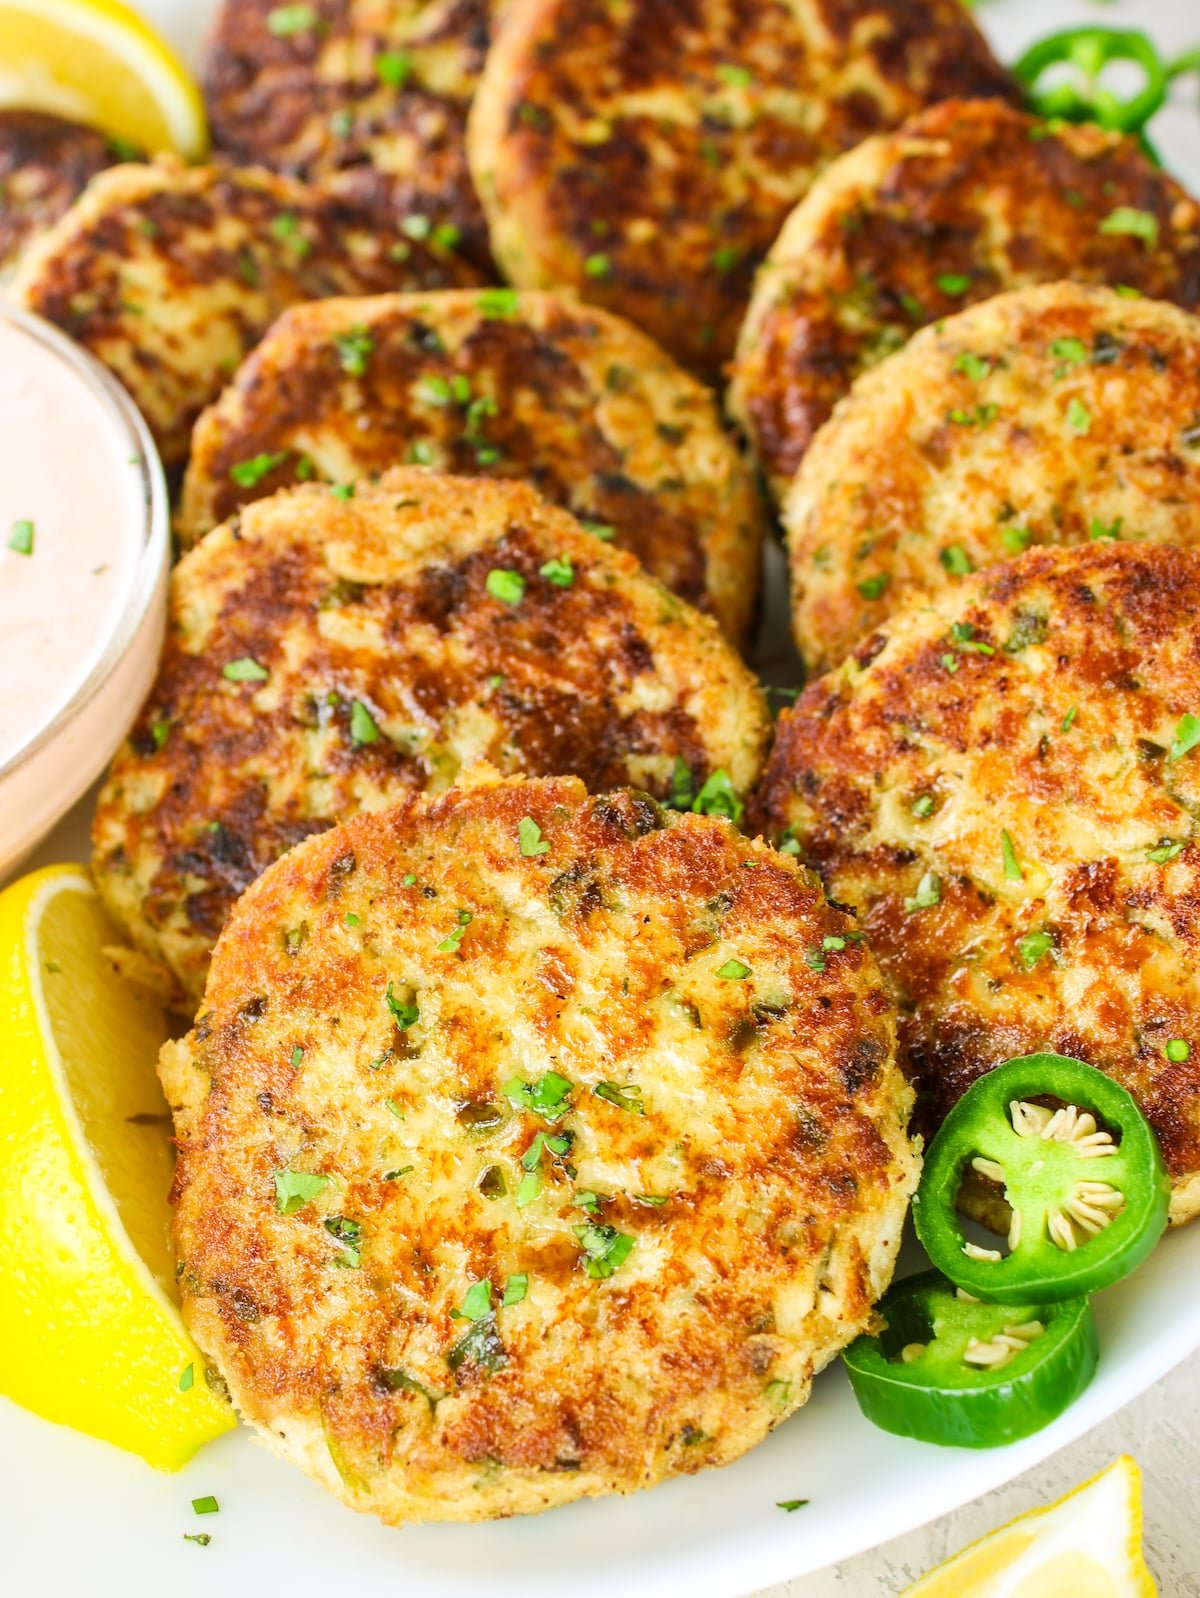 A close-up photo of tuna cakes on a plate.